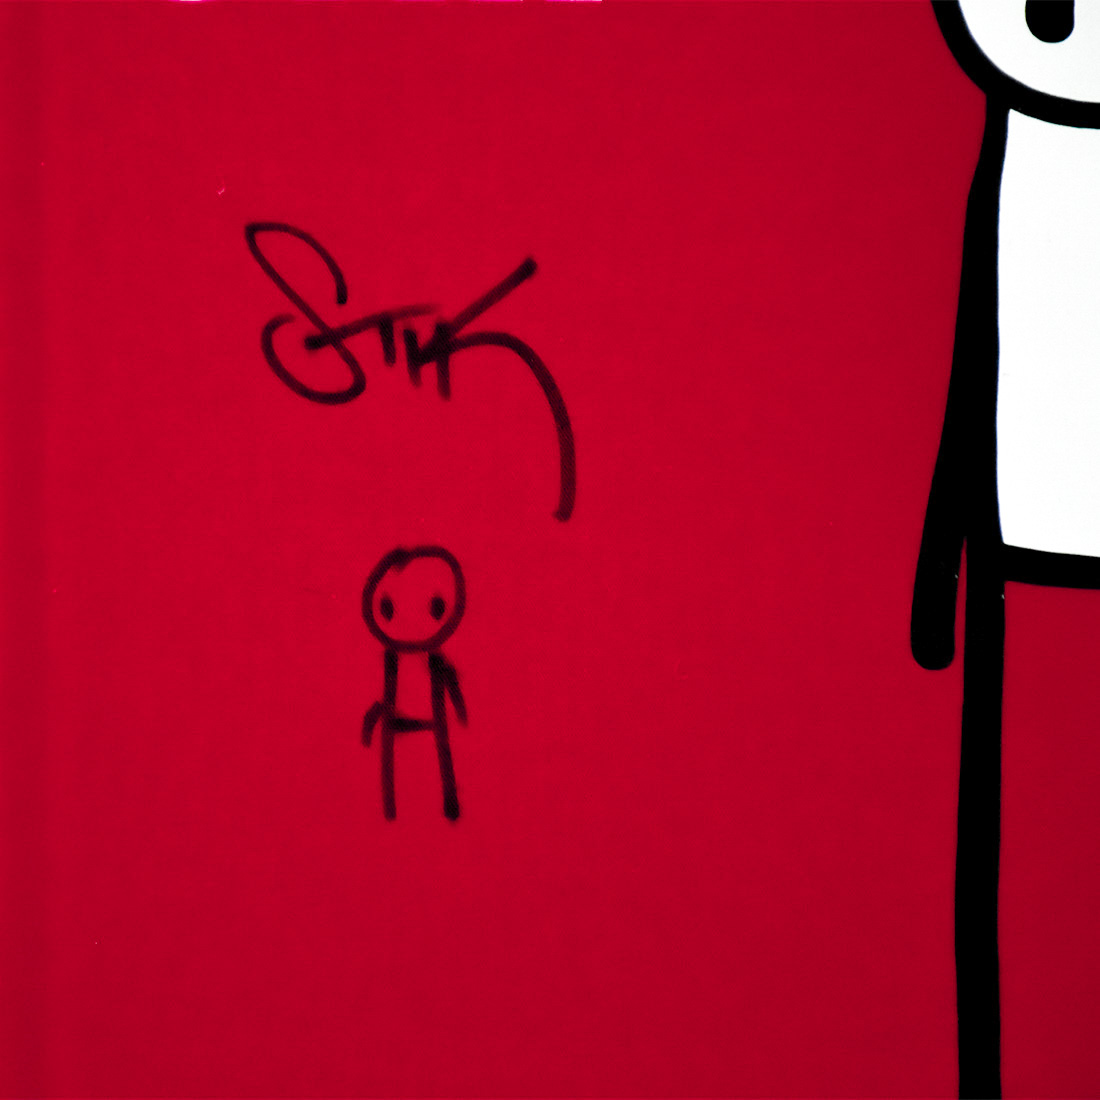 close up of artist stik book signed with hand drawn figure on cover